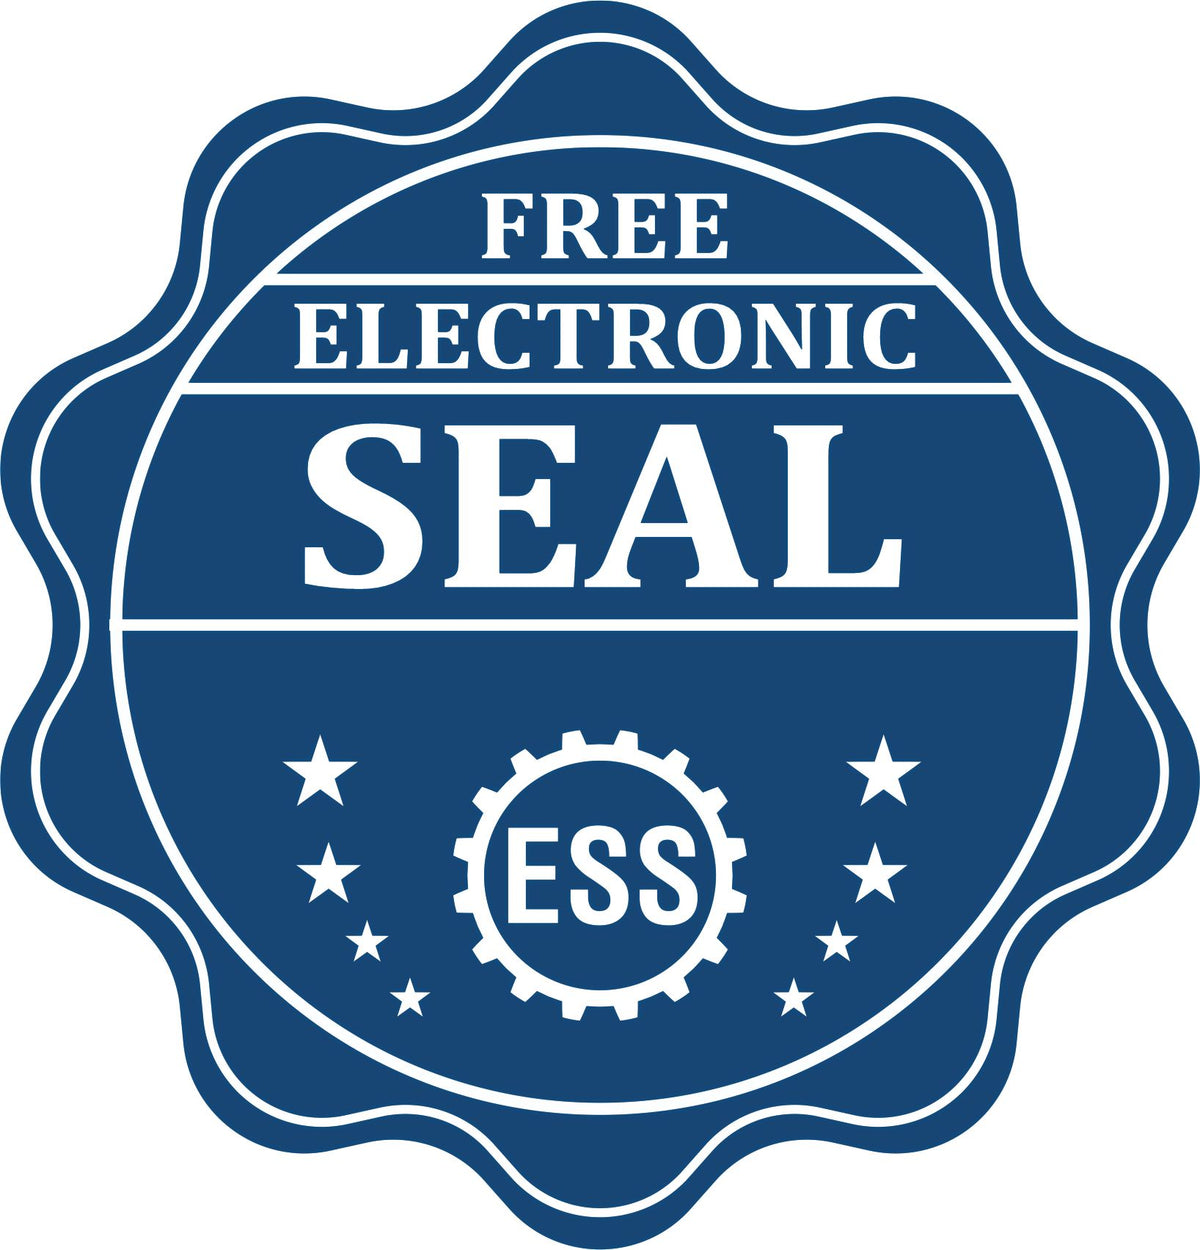 A badge showing a free electronic seal for the Gift Pennsylvania Landscape Architect Seal with stars and the ESS gear on the emblem.